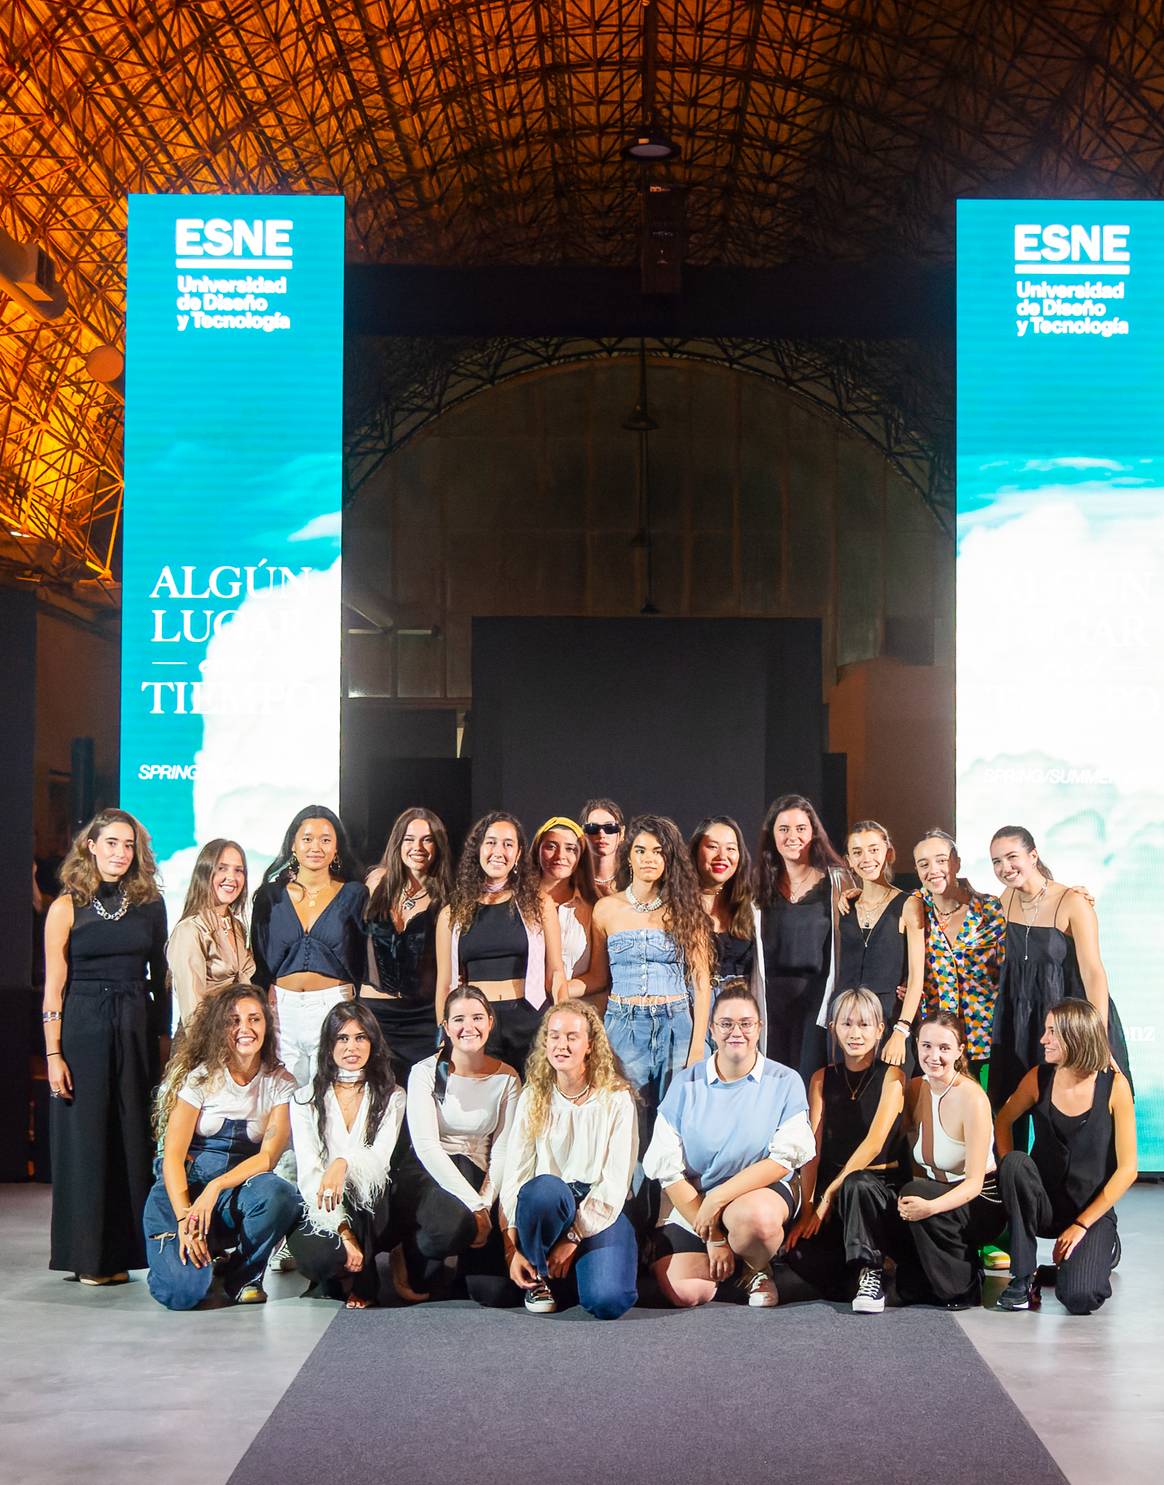 The young designers from ESNE who presented their SS23 fashion show at MBFWMadrid. All images courtesy of the university.